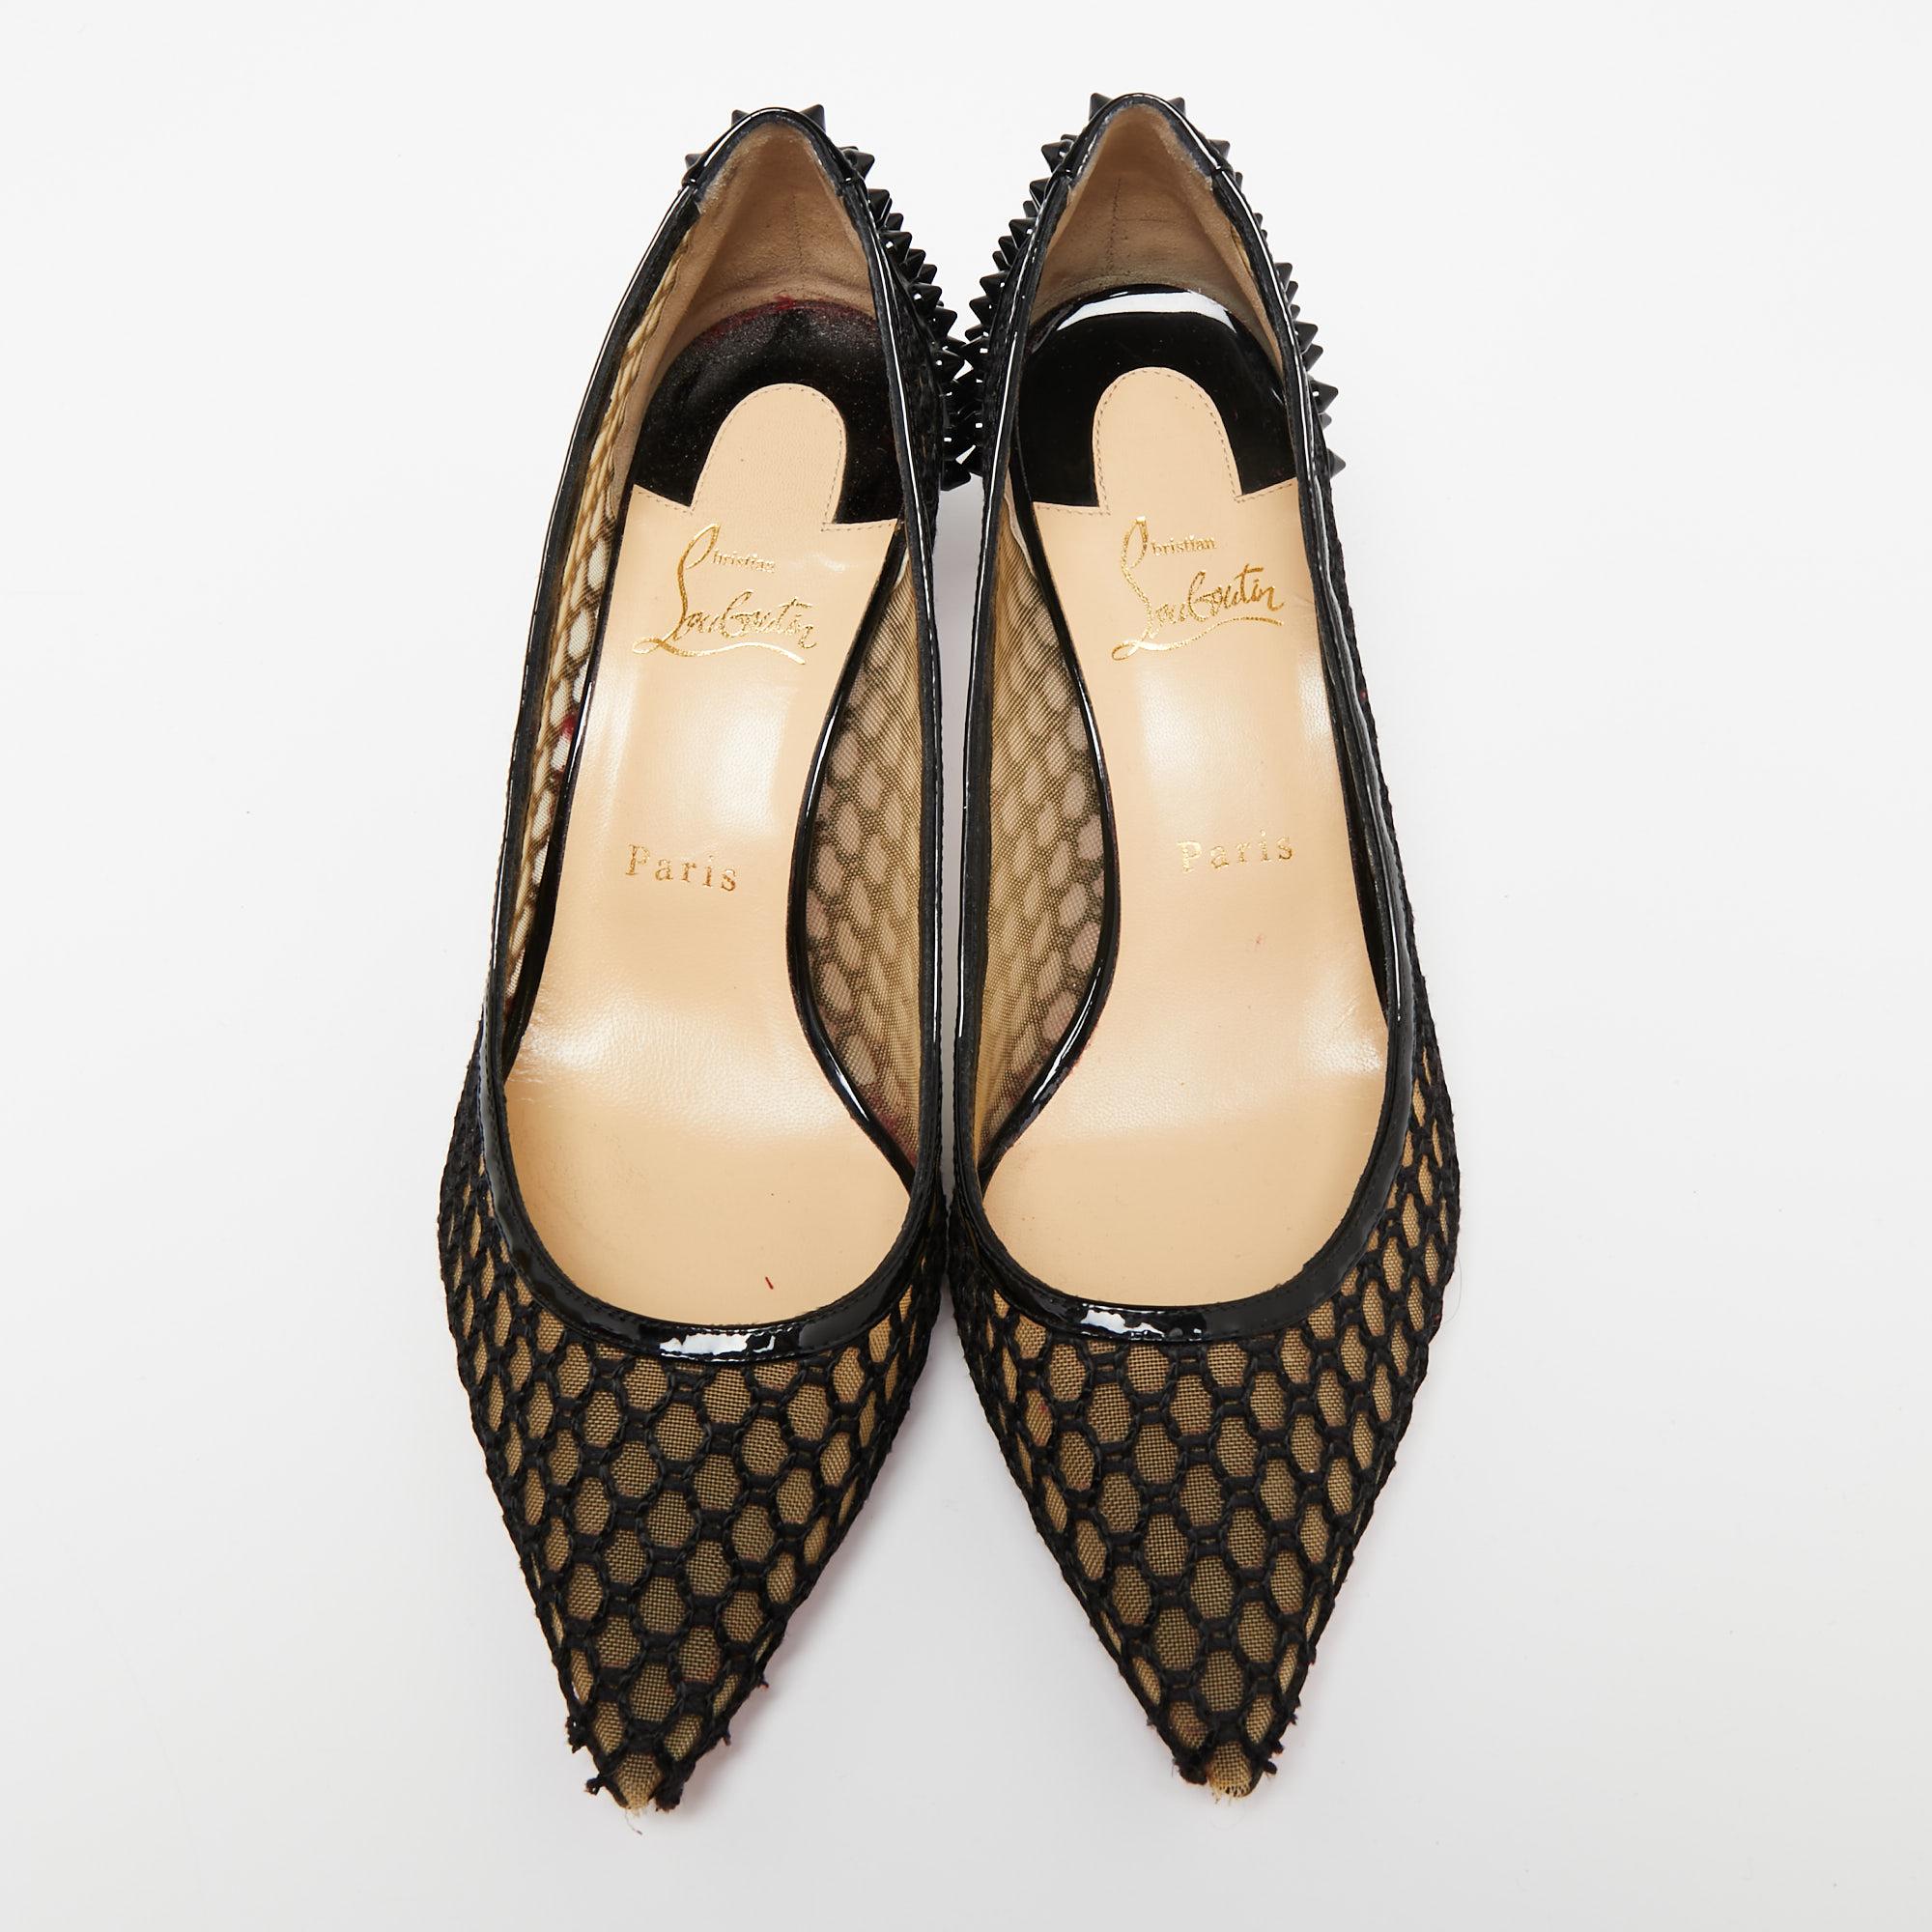 Christian Louboutin brings an element of class to your closet with these stunning Guni pumps. They are created using black mesh and patent leather on the exterior. They showcase pointed toes, slim heels, and a slip-on closure. Make a fashion